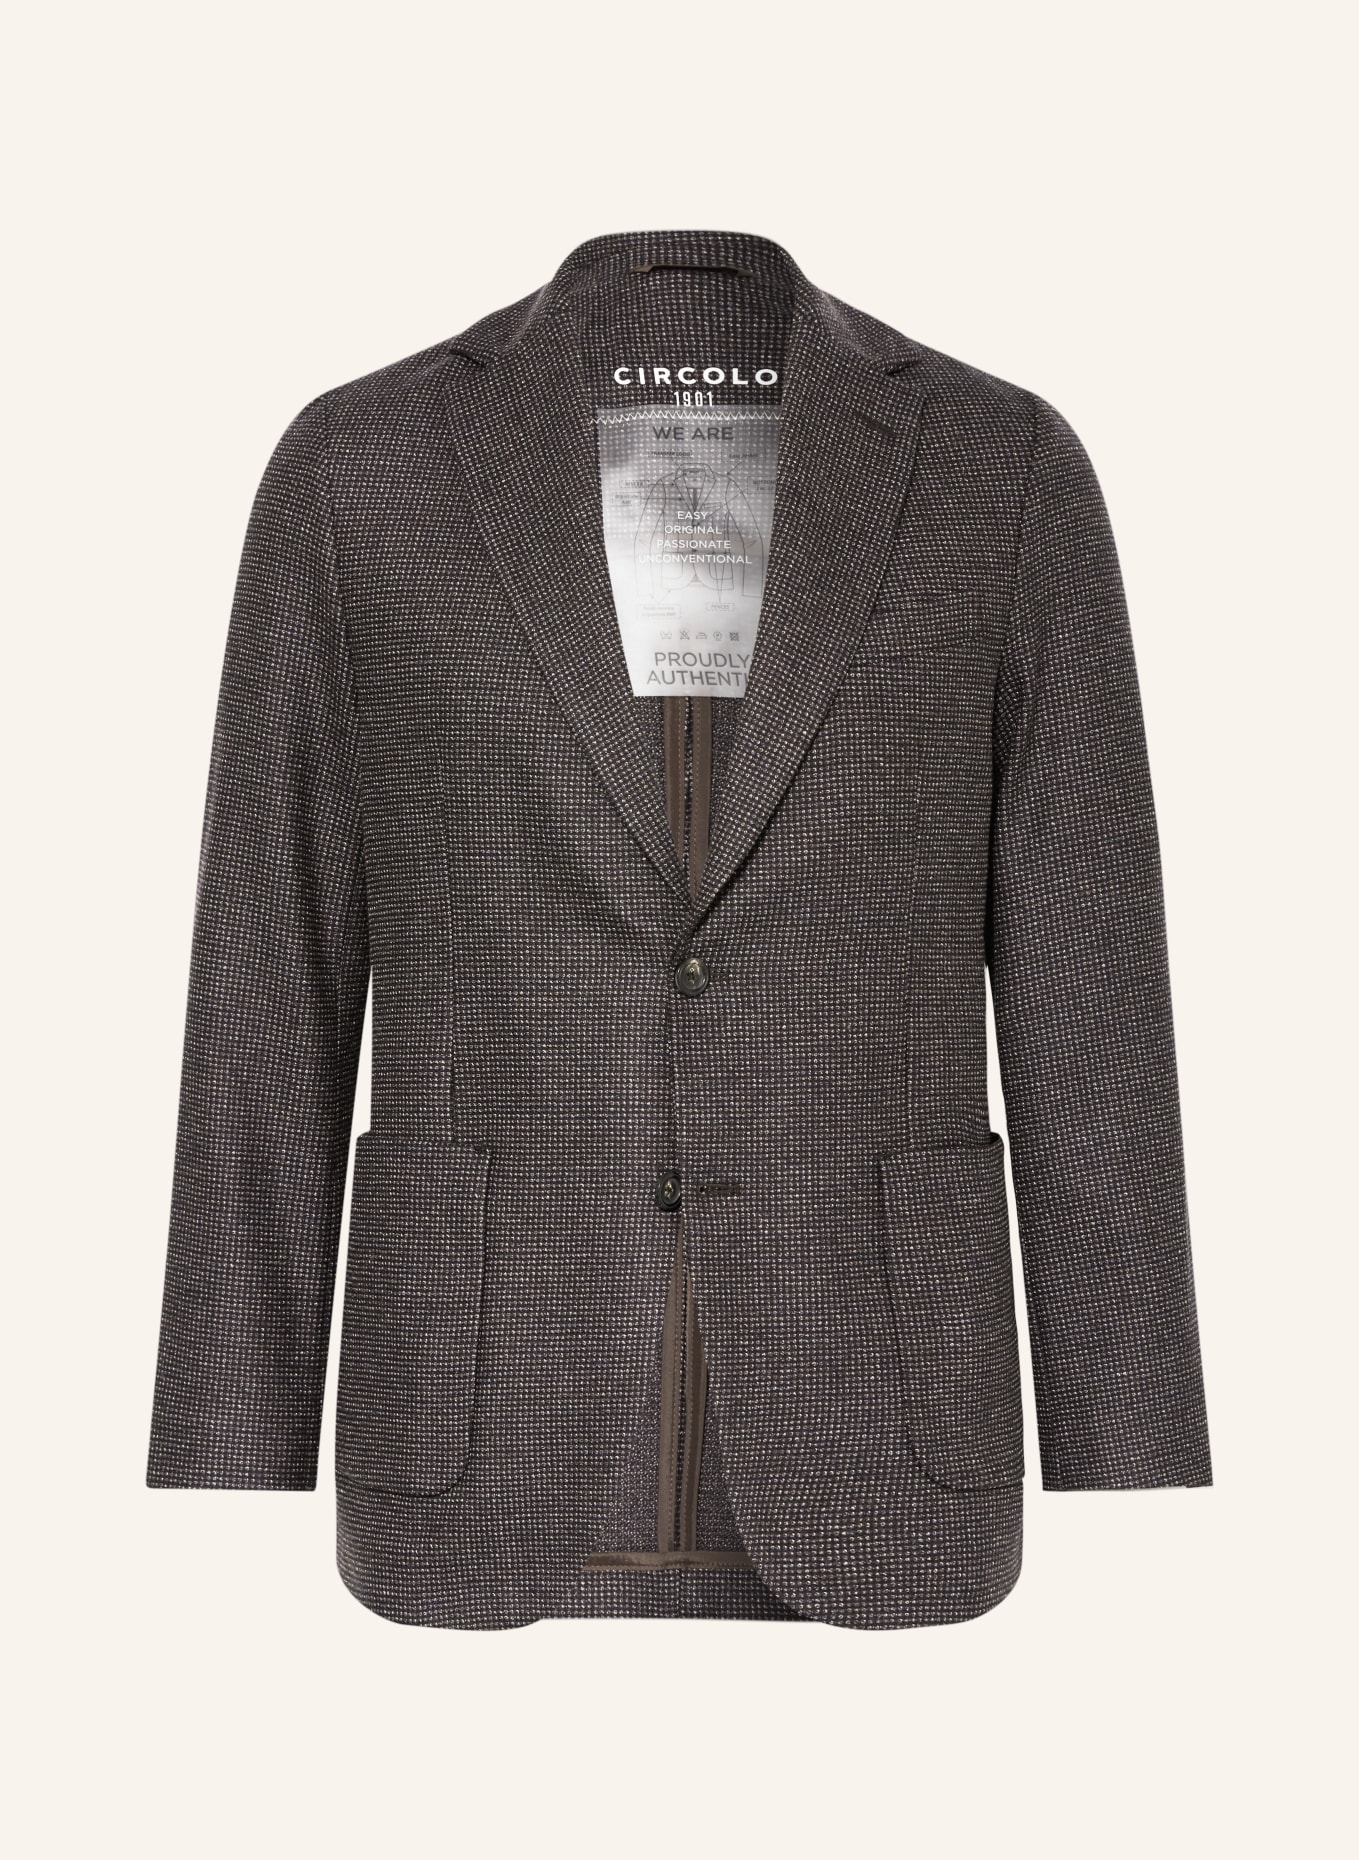 CIRCOLO 1901 Tailored jacket extra slim fit, Color: DARK BROWN/ BROWN/ BEIGE (Image 1)